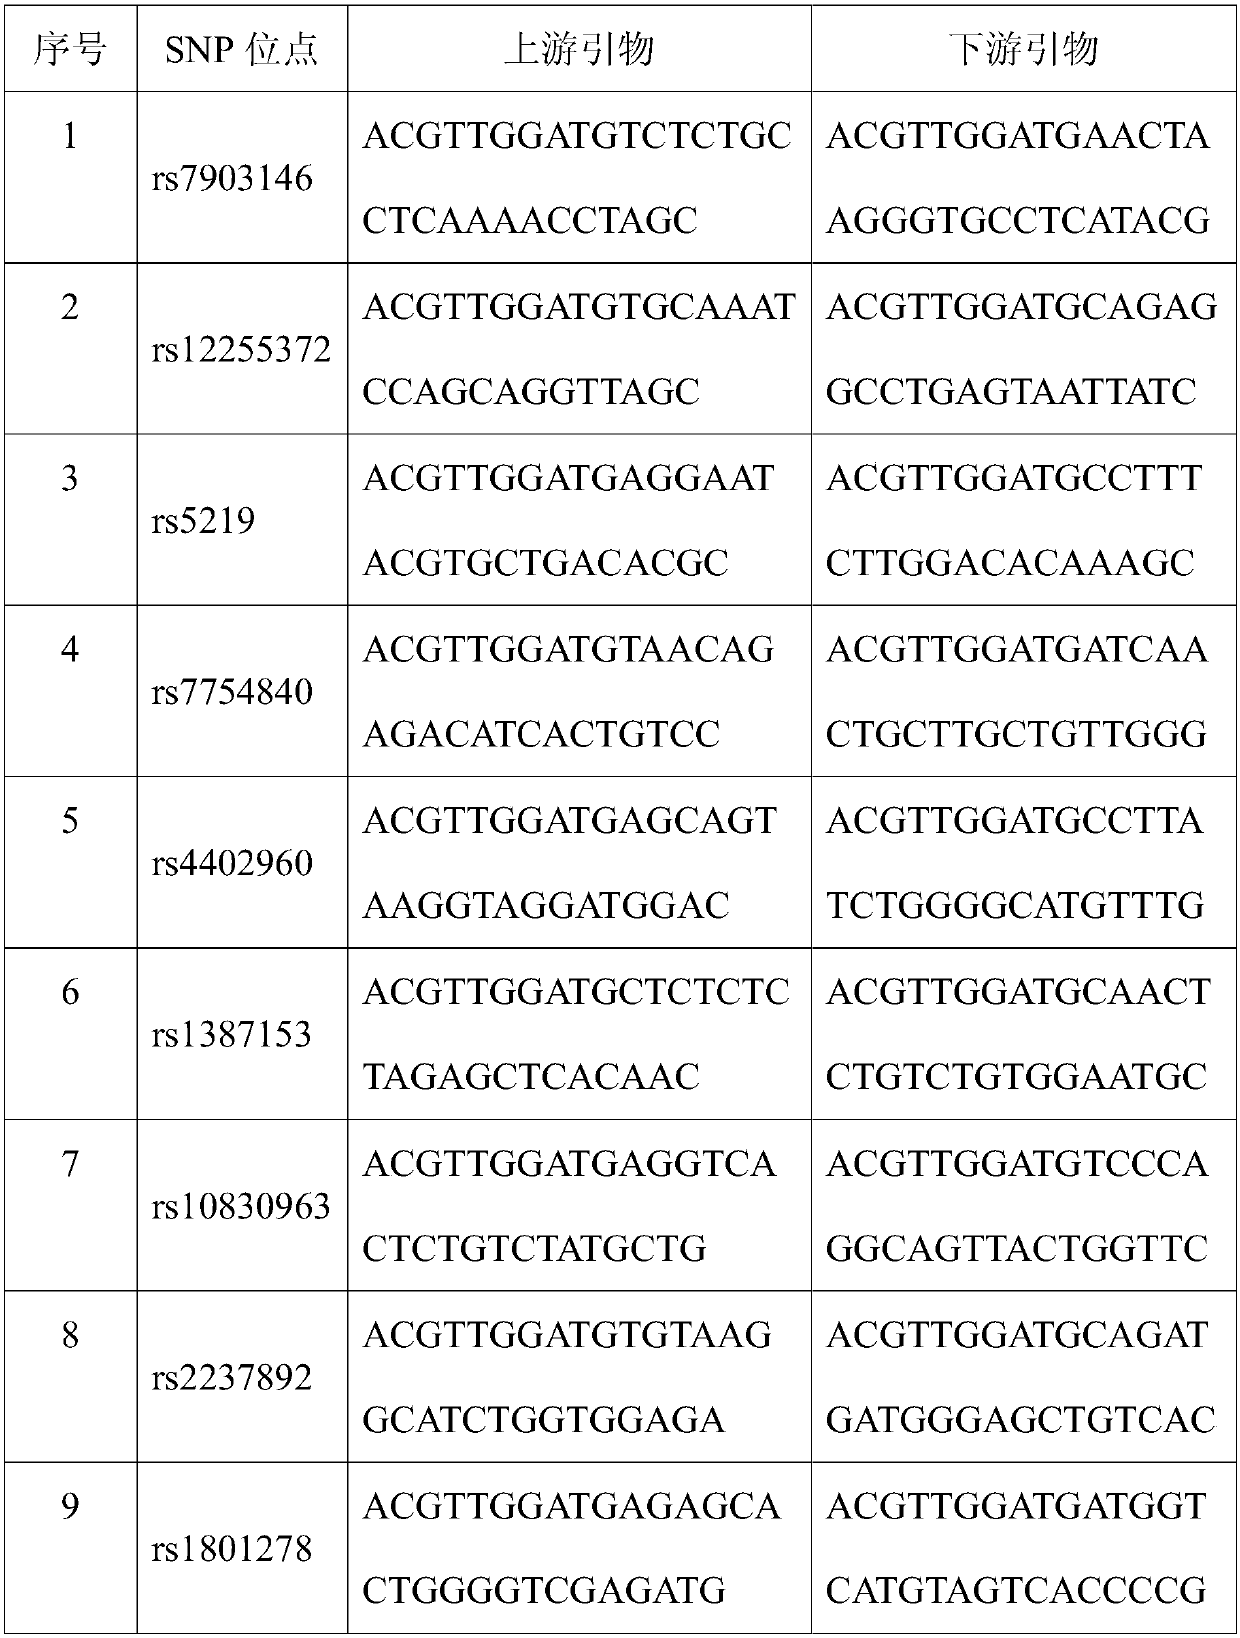 SNP (Single Nucleotide Polymorphism) marker for detecting diseasing risk of gestational diabetes and kit